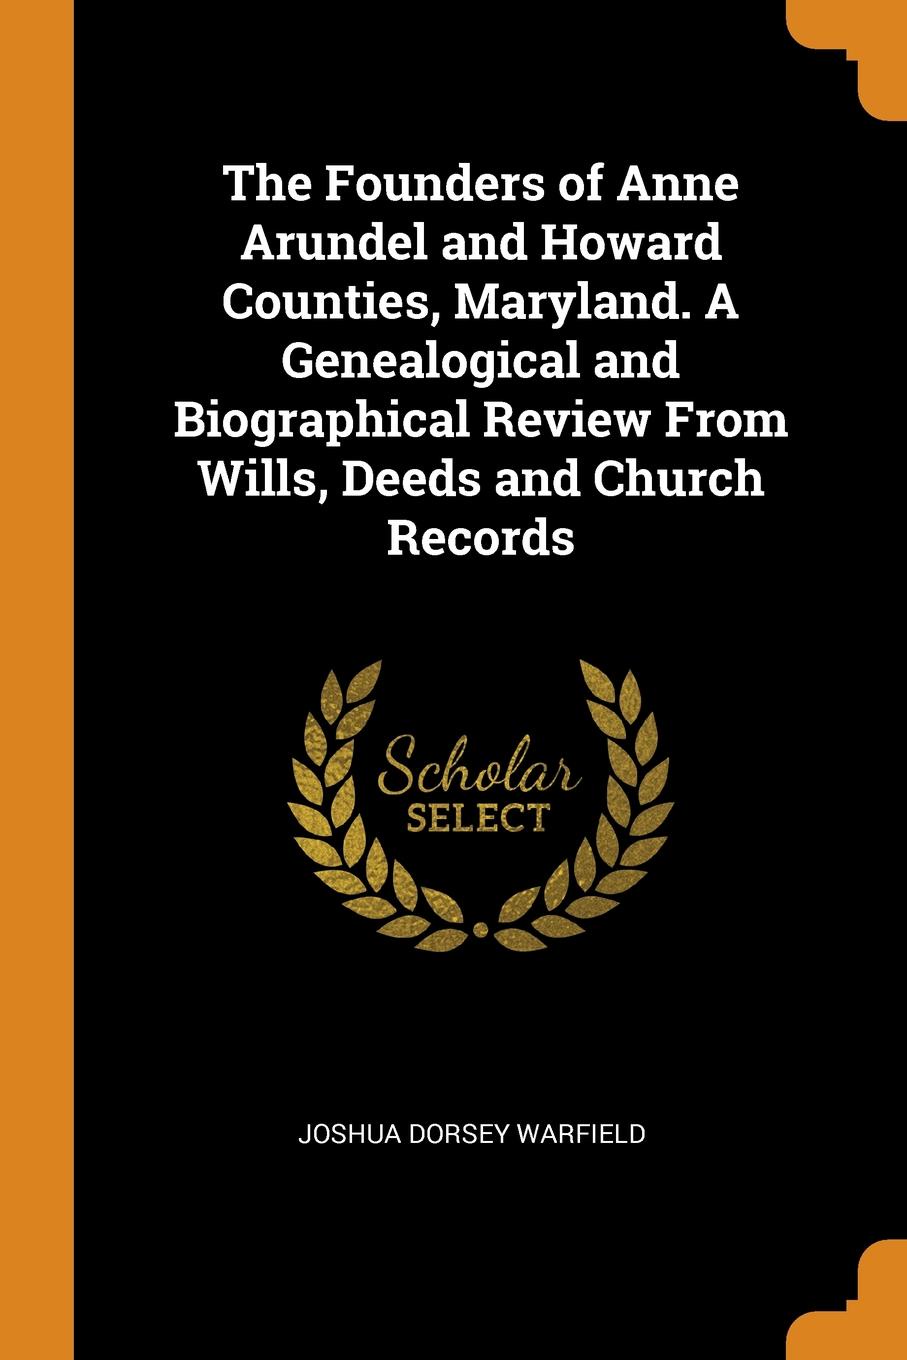 The Founders of Anne Arundel and Howard Counties, Maryland. A Genealogical and Biographical Review From Wills, Deeds and Church Records